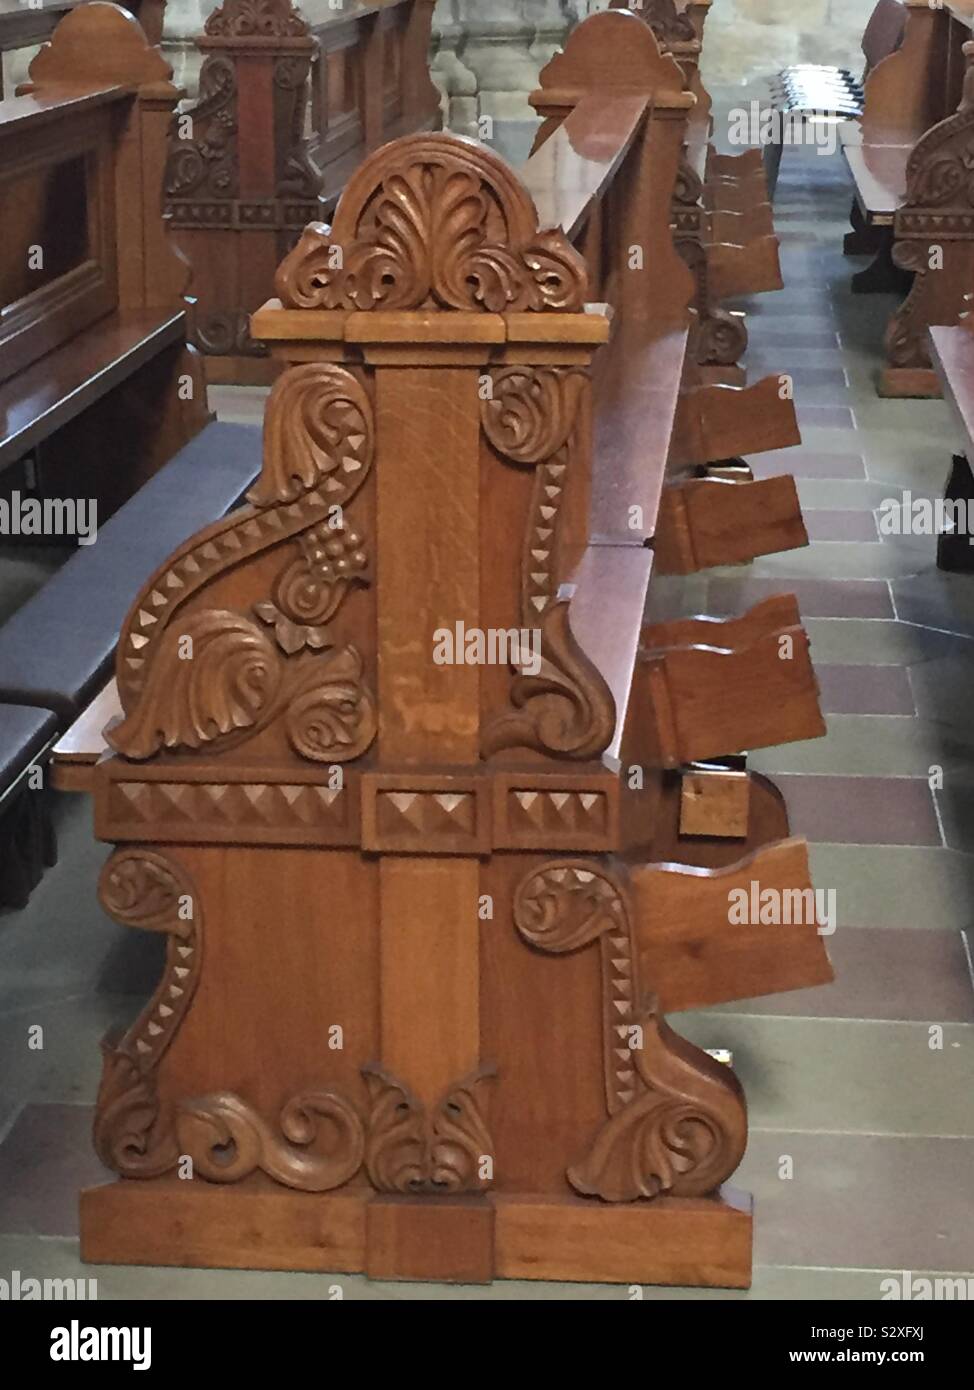 Church pew in wood with carvings Stock Photo